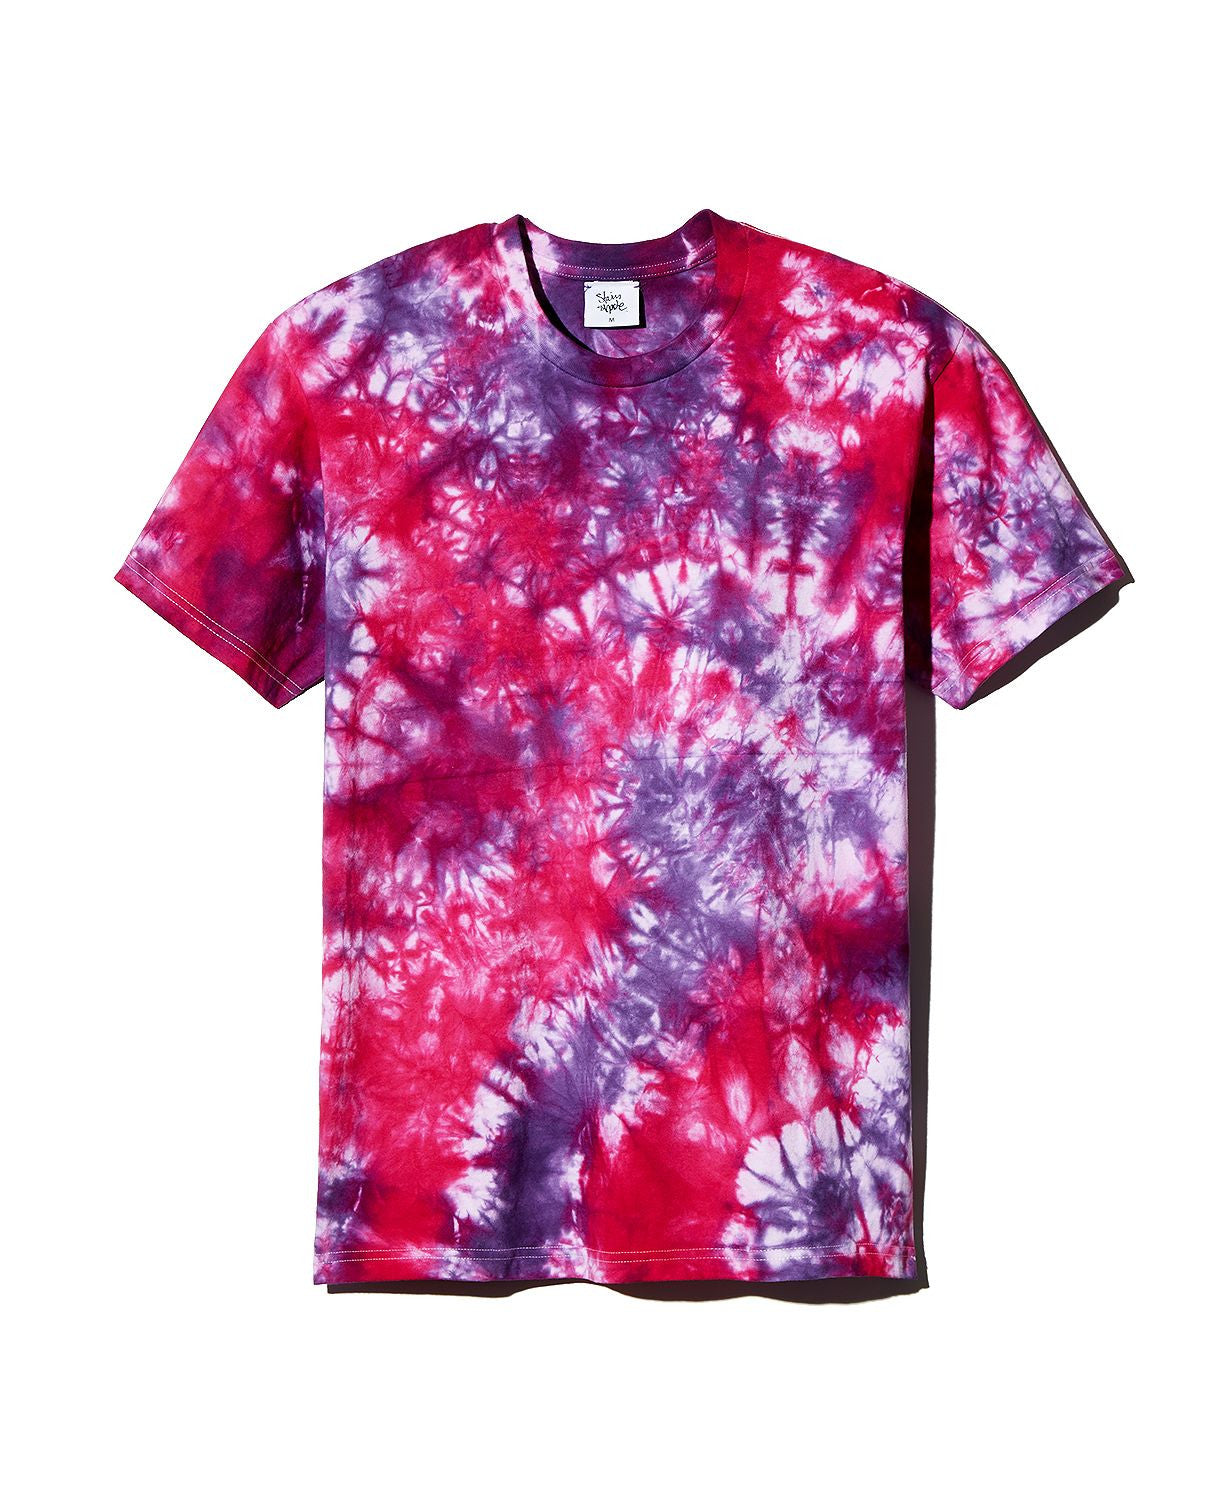 Stain Shade Tie-dyed Crewneck Tee